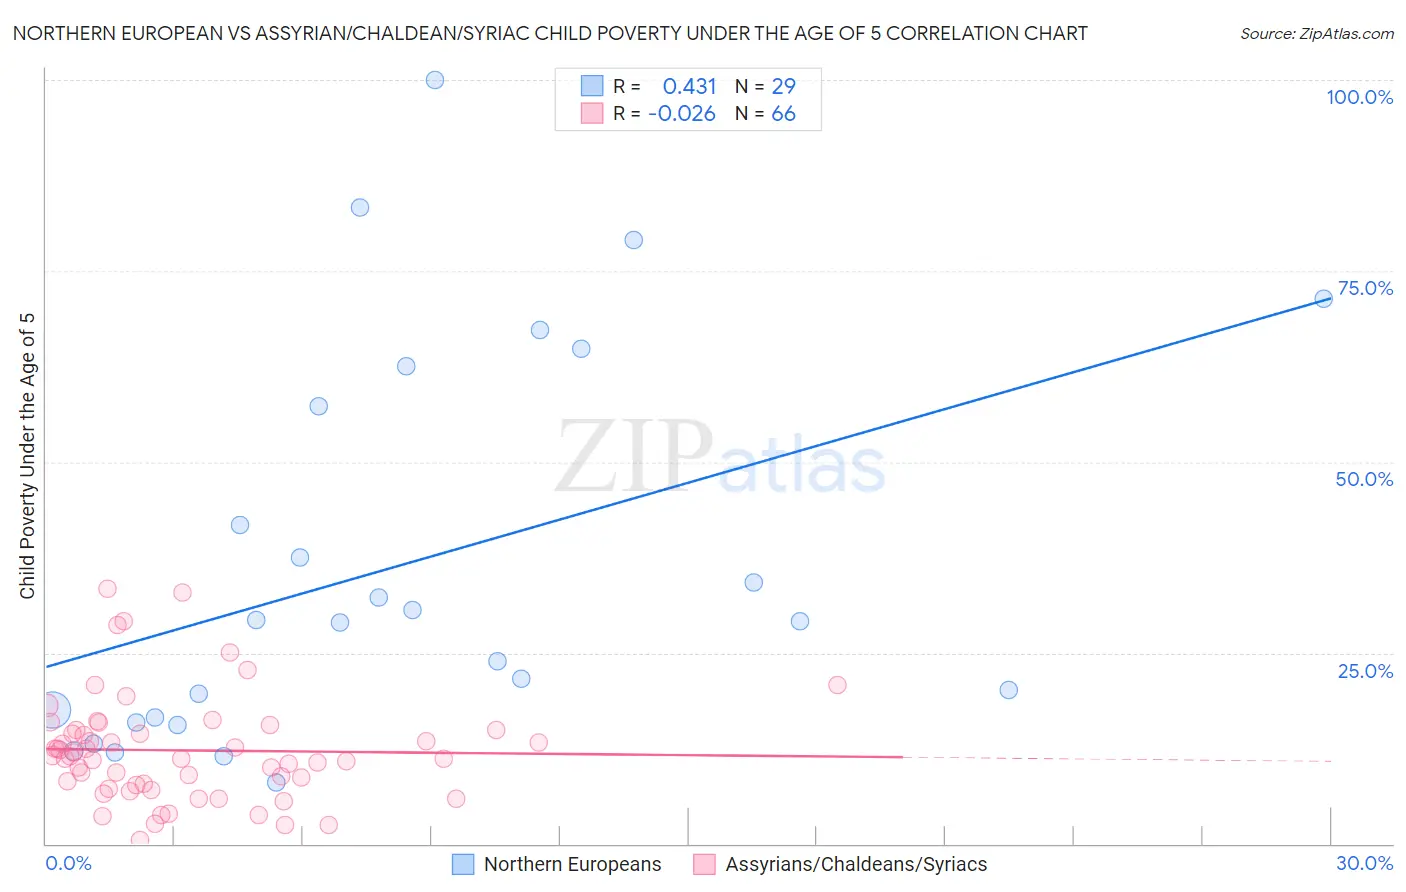 Northern European vs Assyrian/Chaldean/Syriac Child Poverty Under the Age of 5